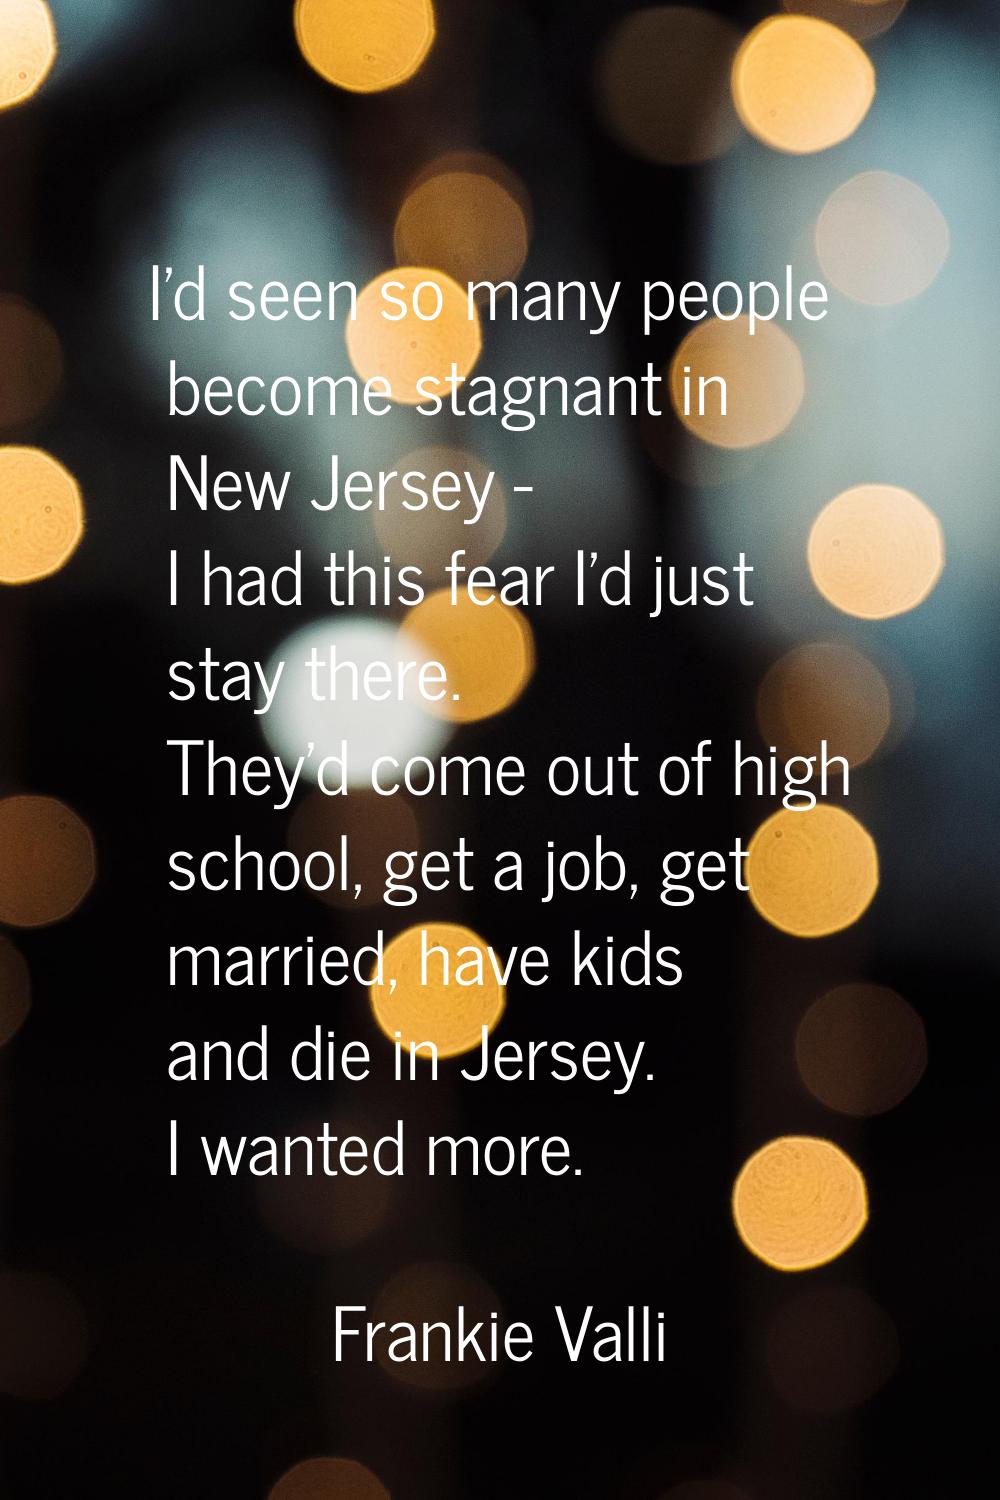 I'd seen so many people become stagnant in New Jersey - I had this fear I'd just stay there. They'd